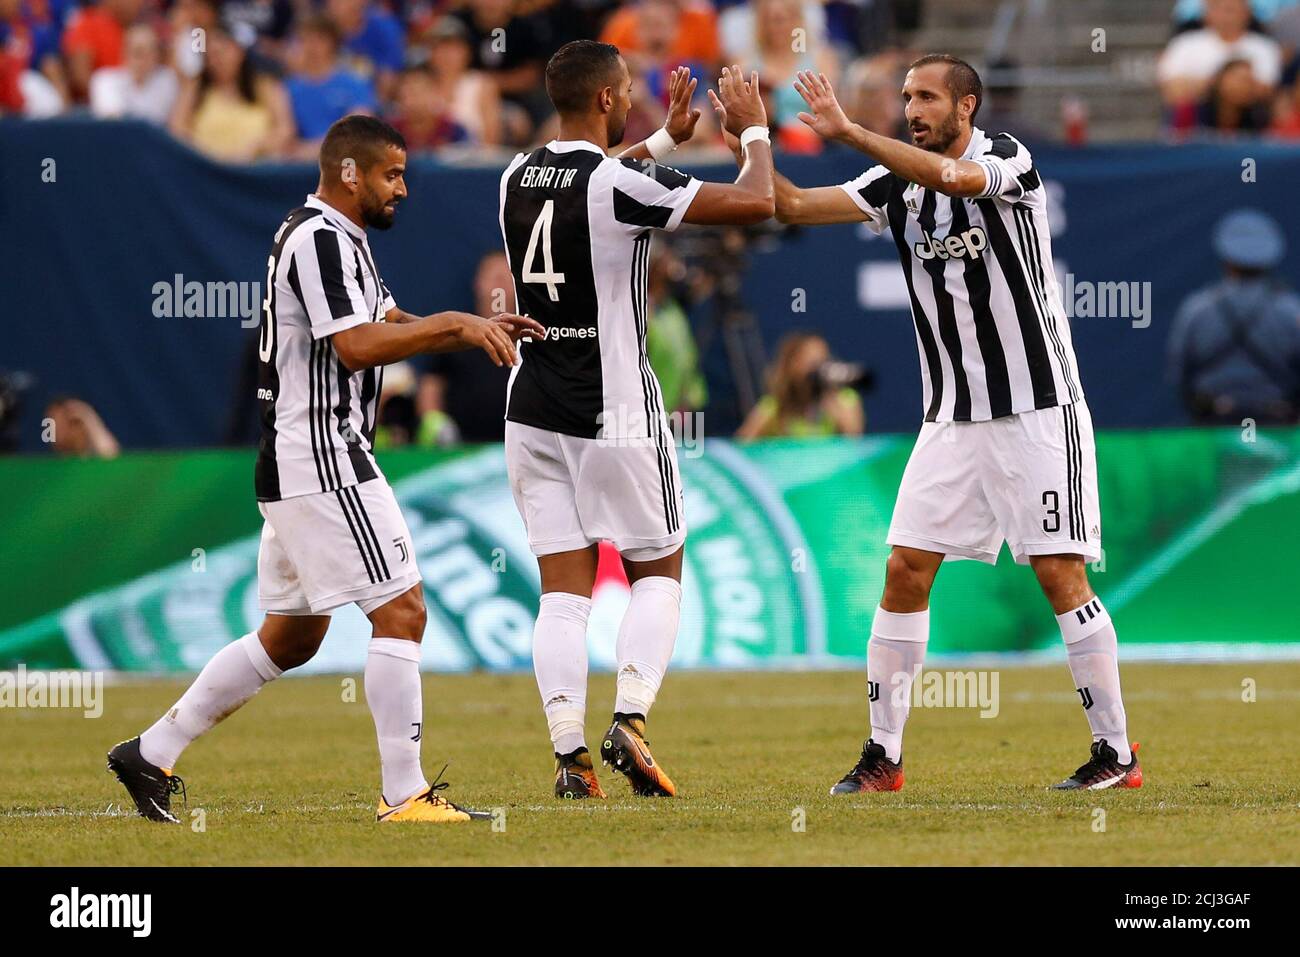 Football Soccer - Barcelona v Juventus - International Champions Cup - East  Rutherford, New Jersey, U.S. - July 22, 2017 - Juventus' Giorgo Chellini  celebrates goal with Medhi Benatia against Barcelona. REUTERS/Mike Segar  Stock Photo - Alamy